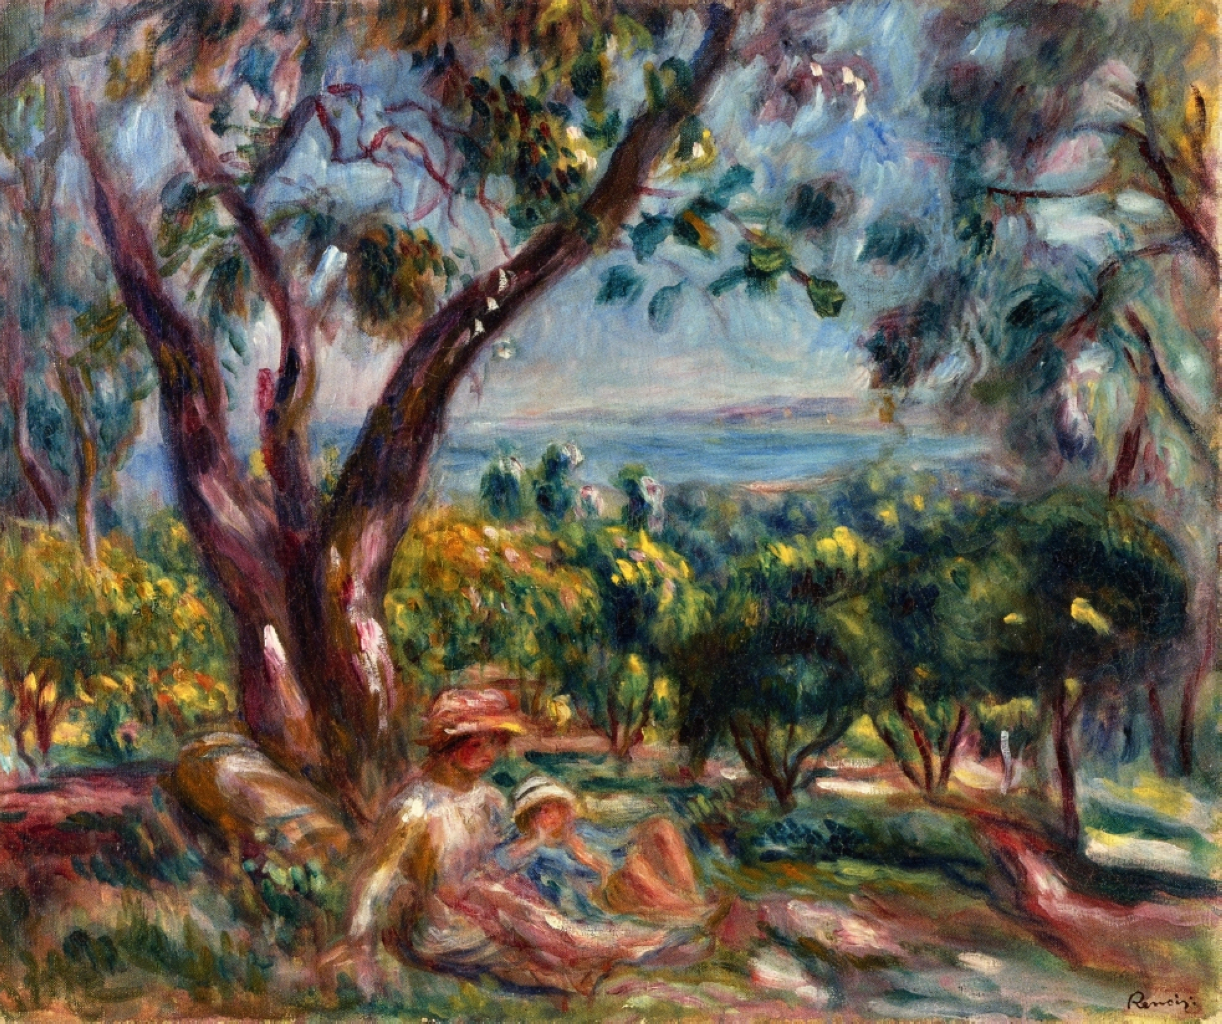 Cagnes Landscape with Woman and Child - Pierre-Auguste Renoir painting on canvas